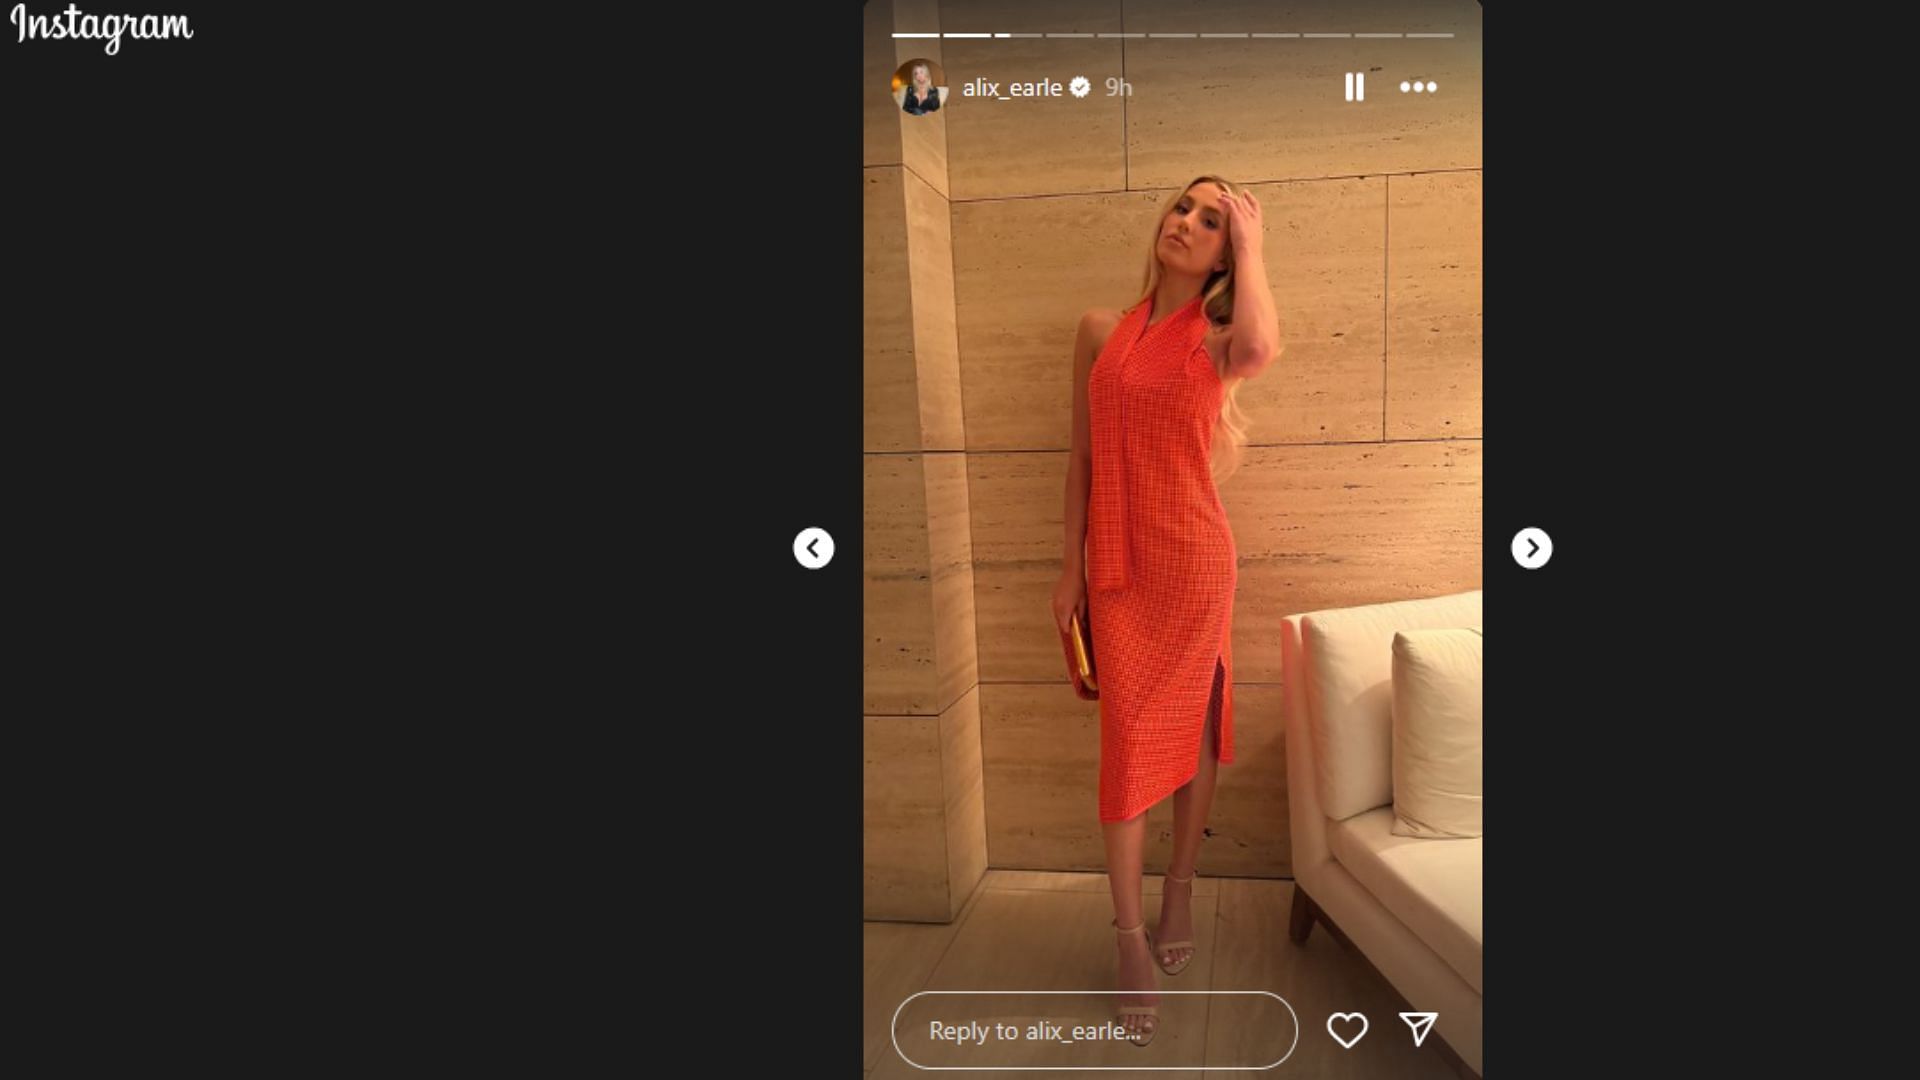 Alix Earle chose an orange dress for the occasion.